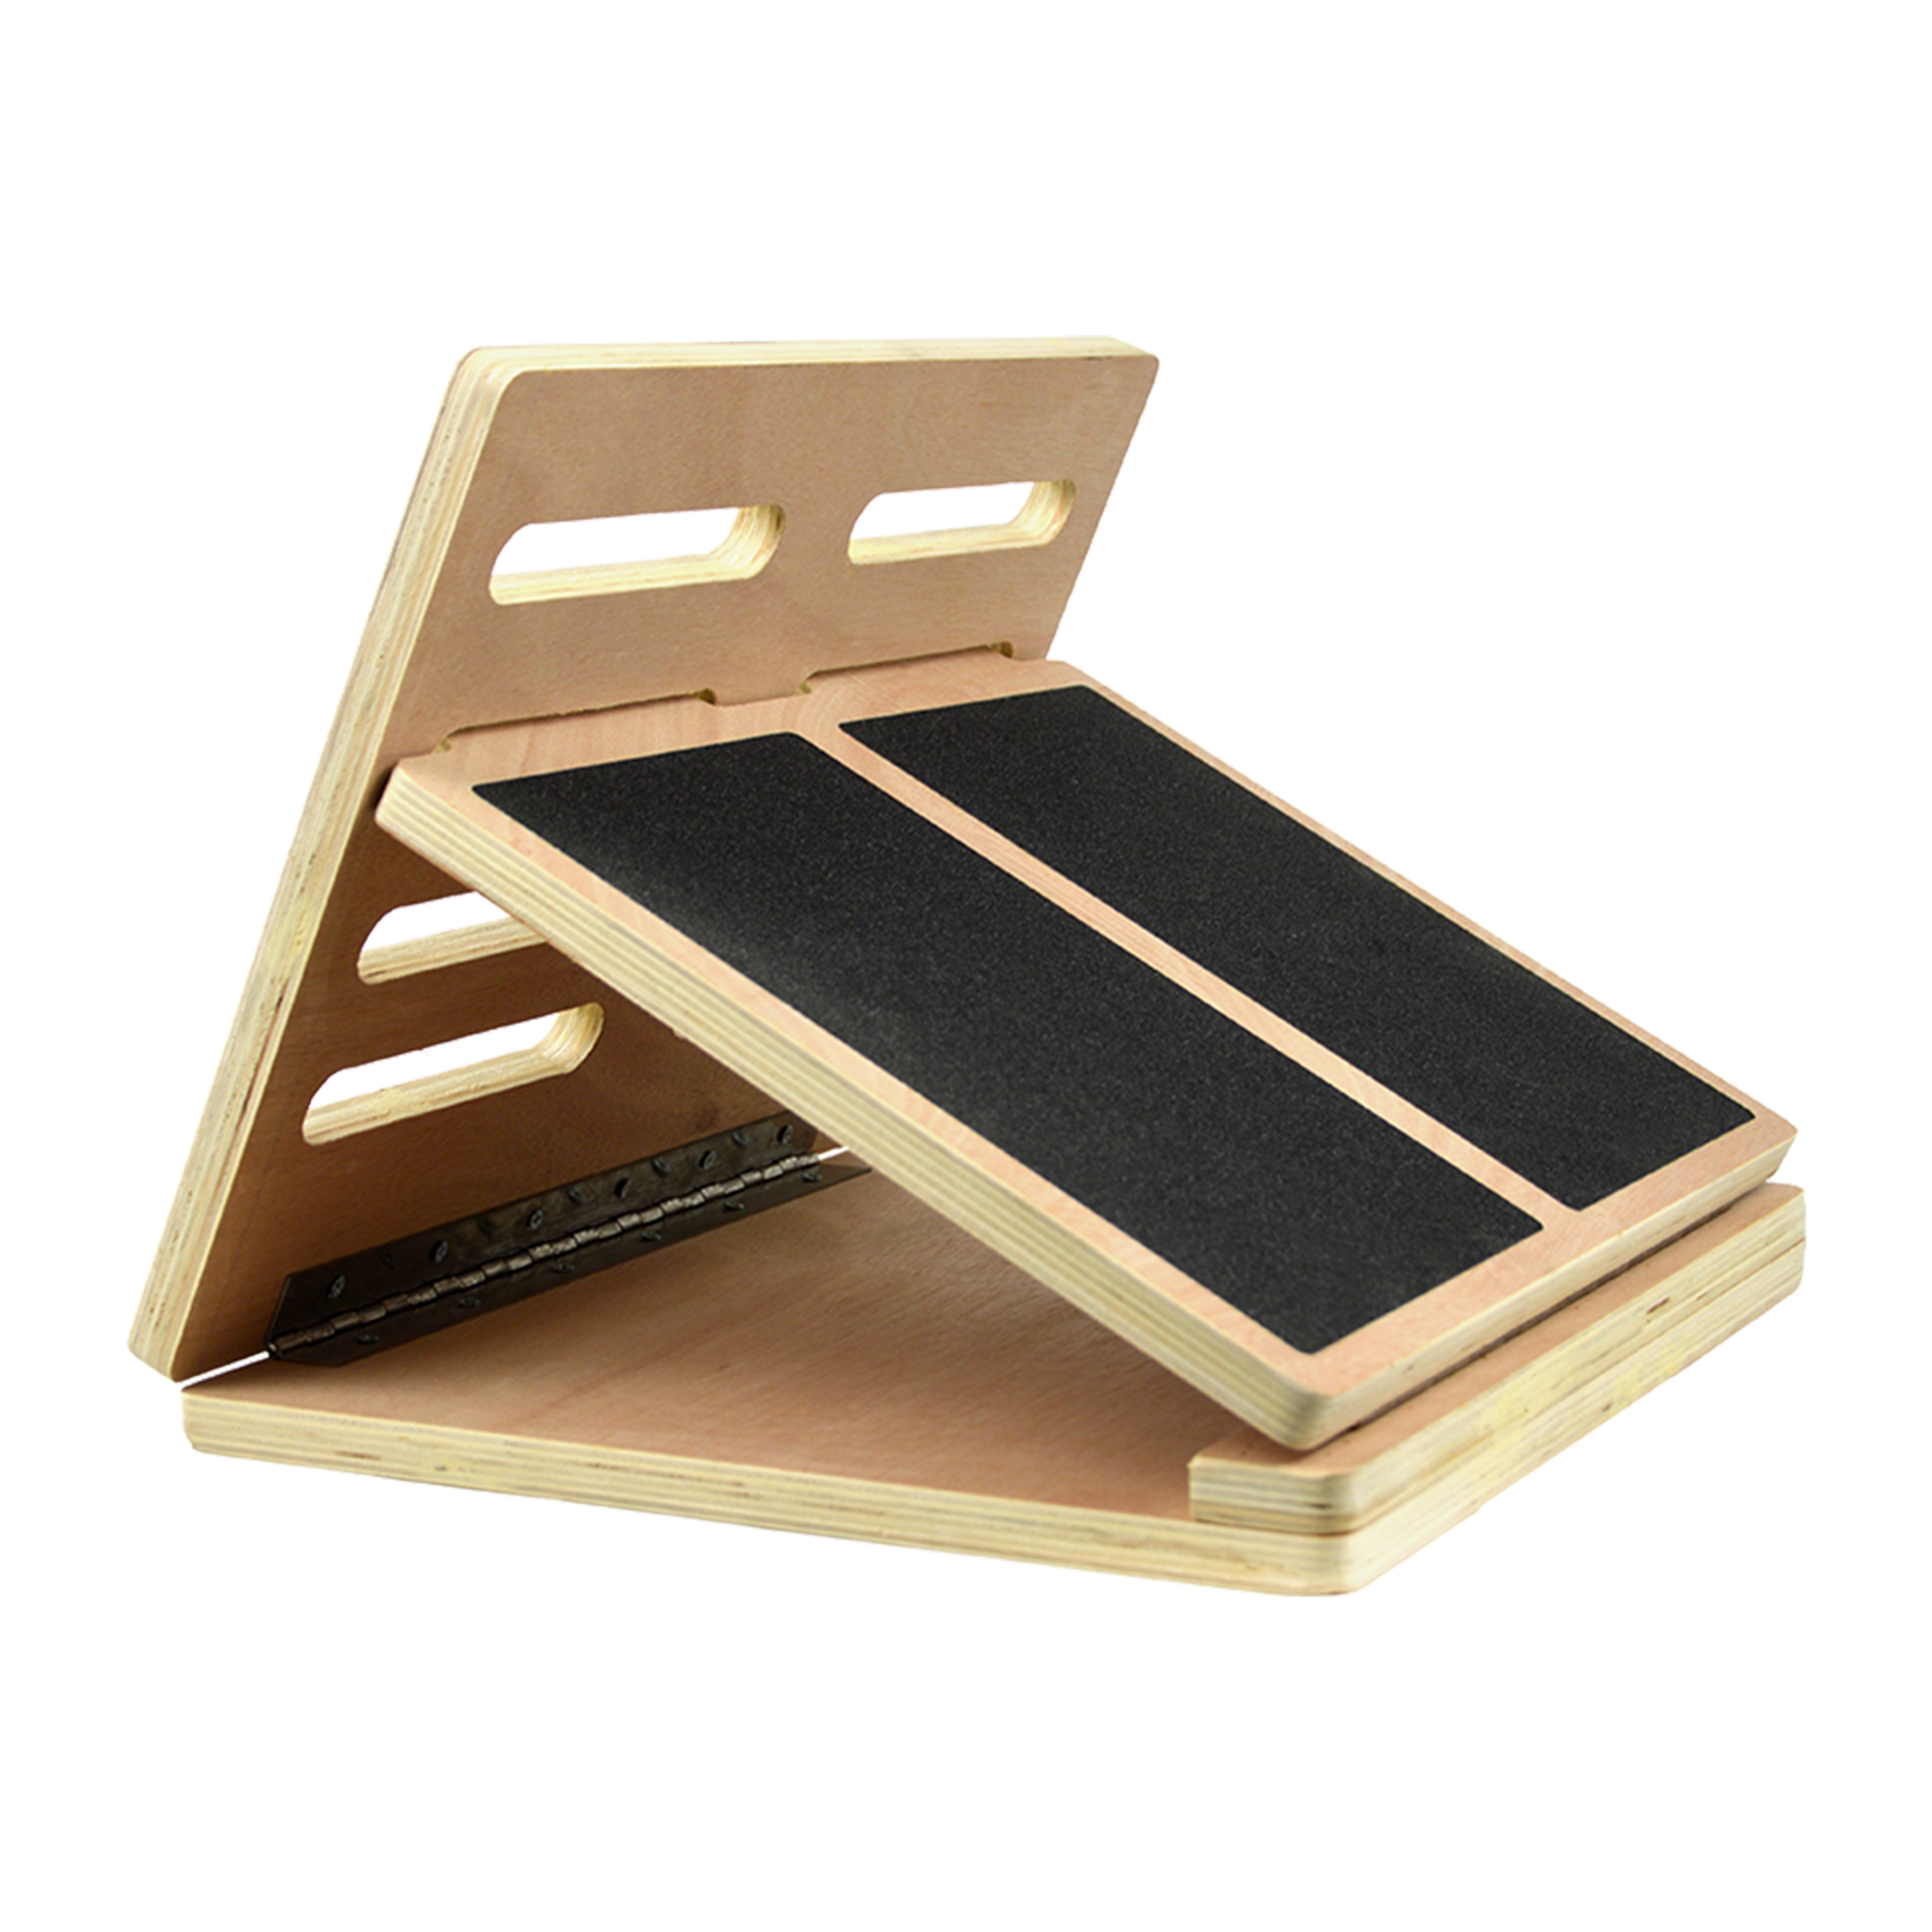 Slant Board Calf Stretcher as used in the Egoscue Method